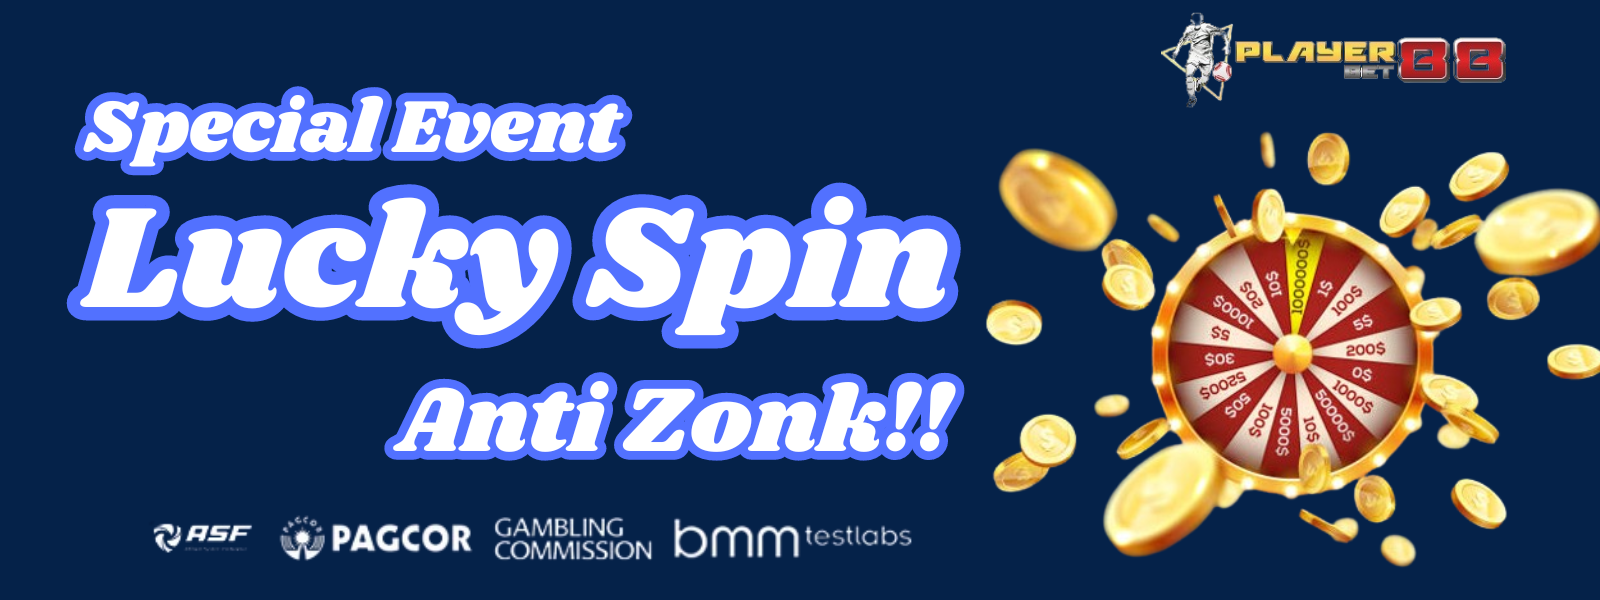 SPECIAL EVENT LUCKY SPIN 